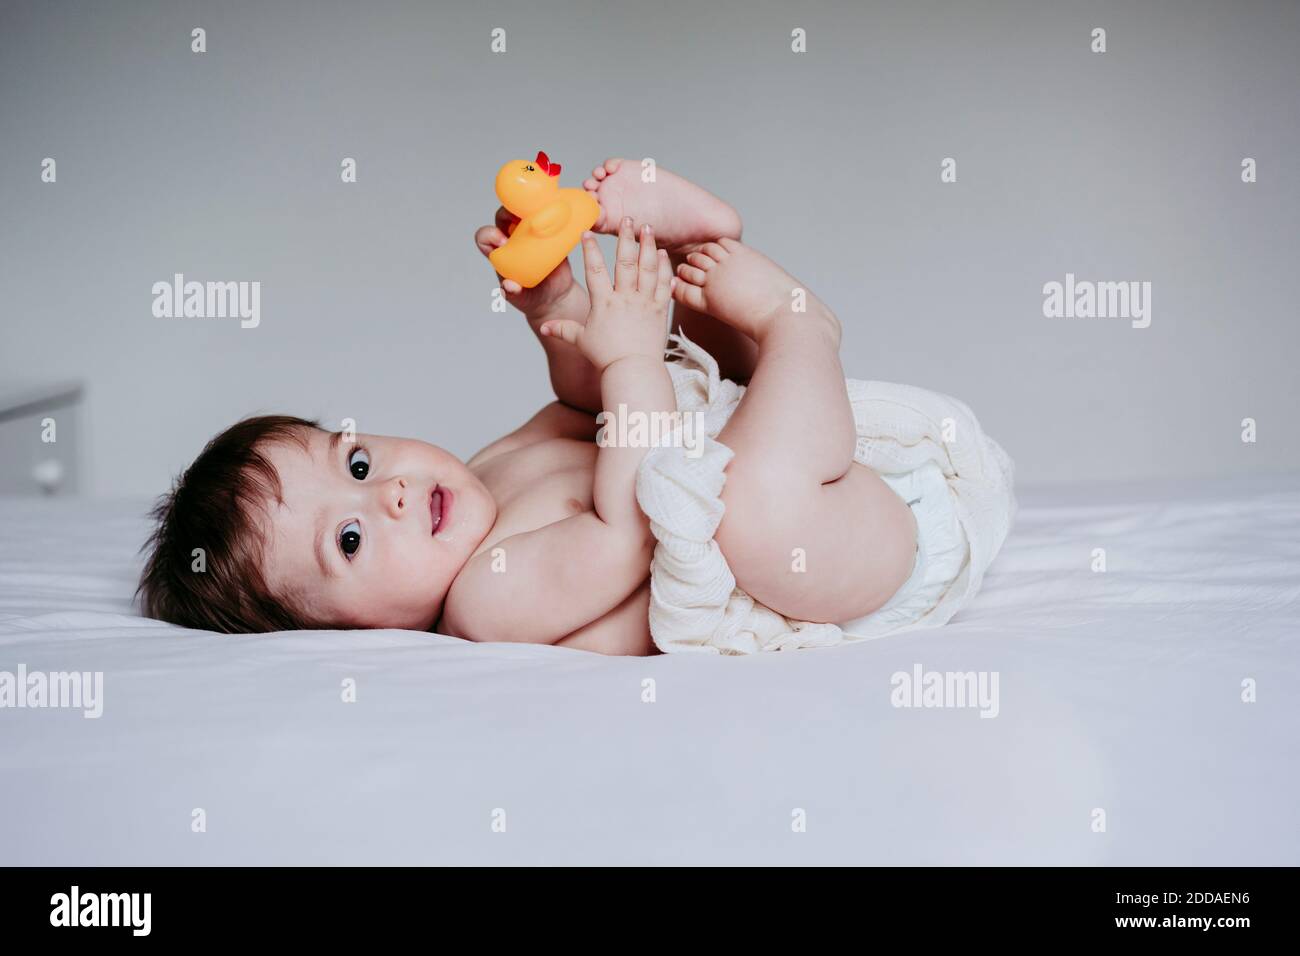 Cute baby boy playing with duck toy while lying down on bed at home Stock Photo